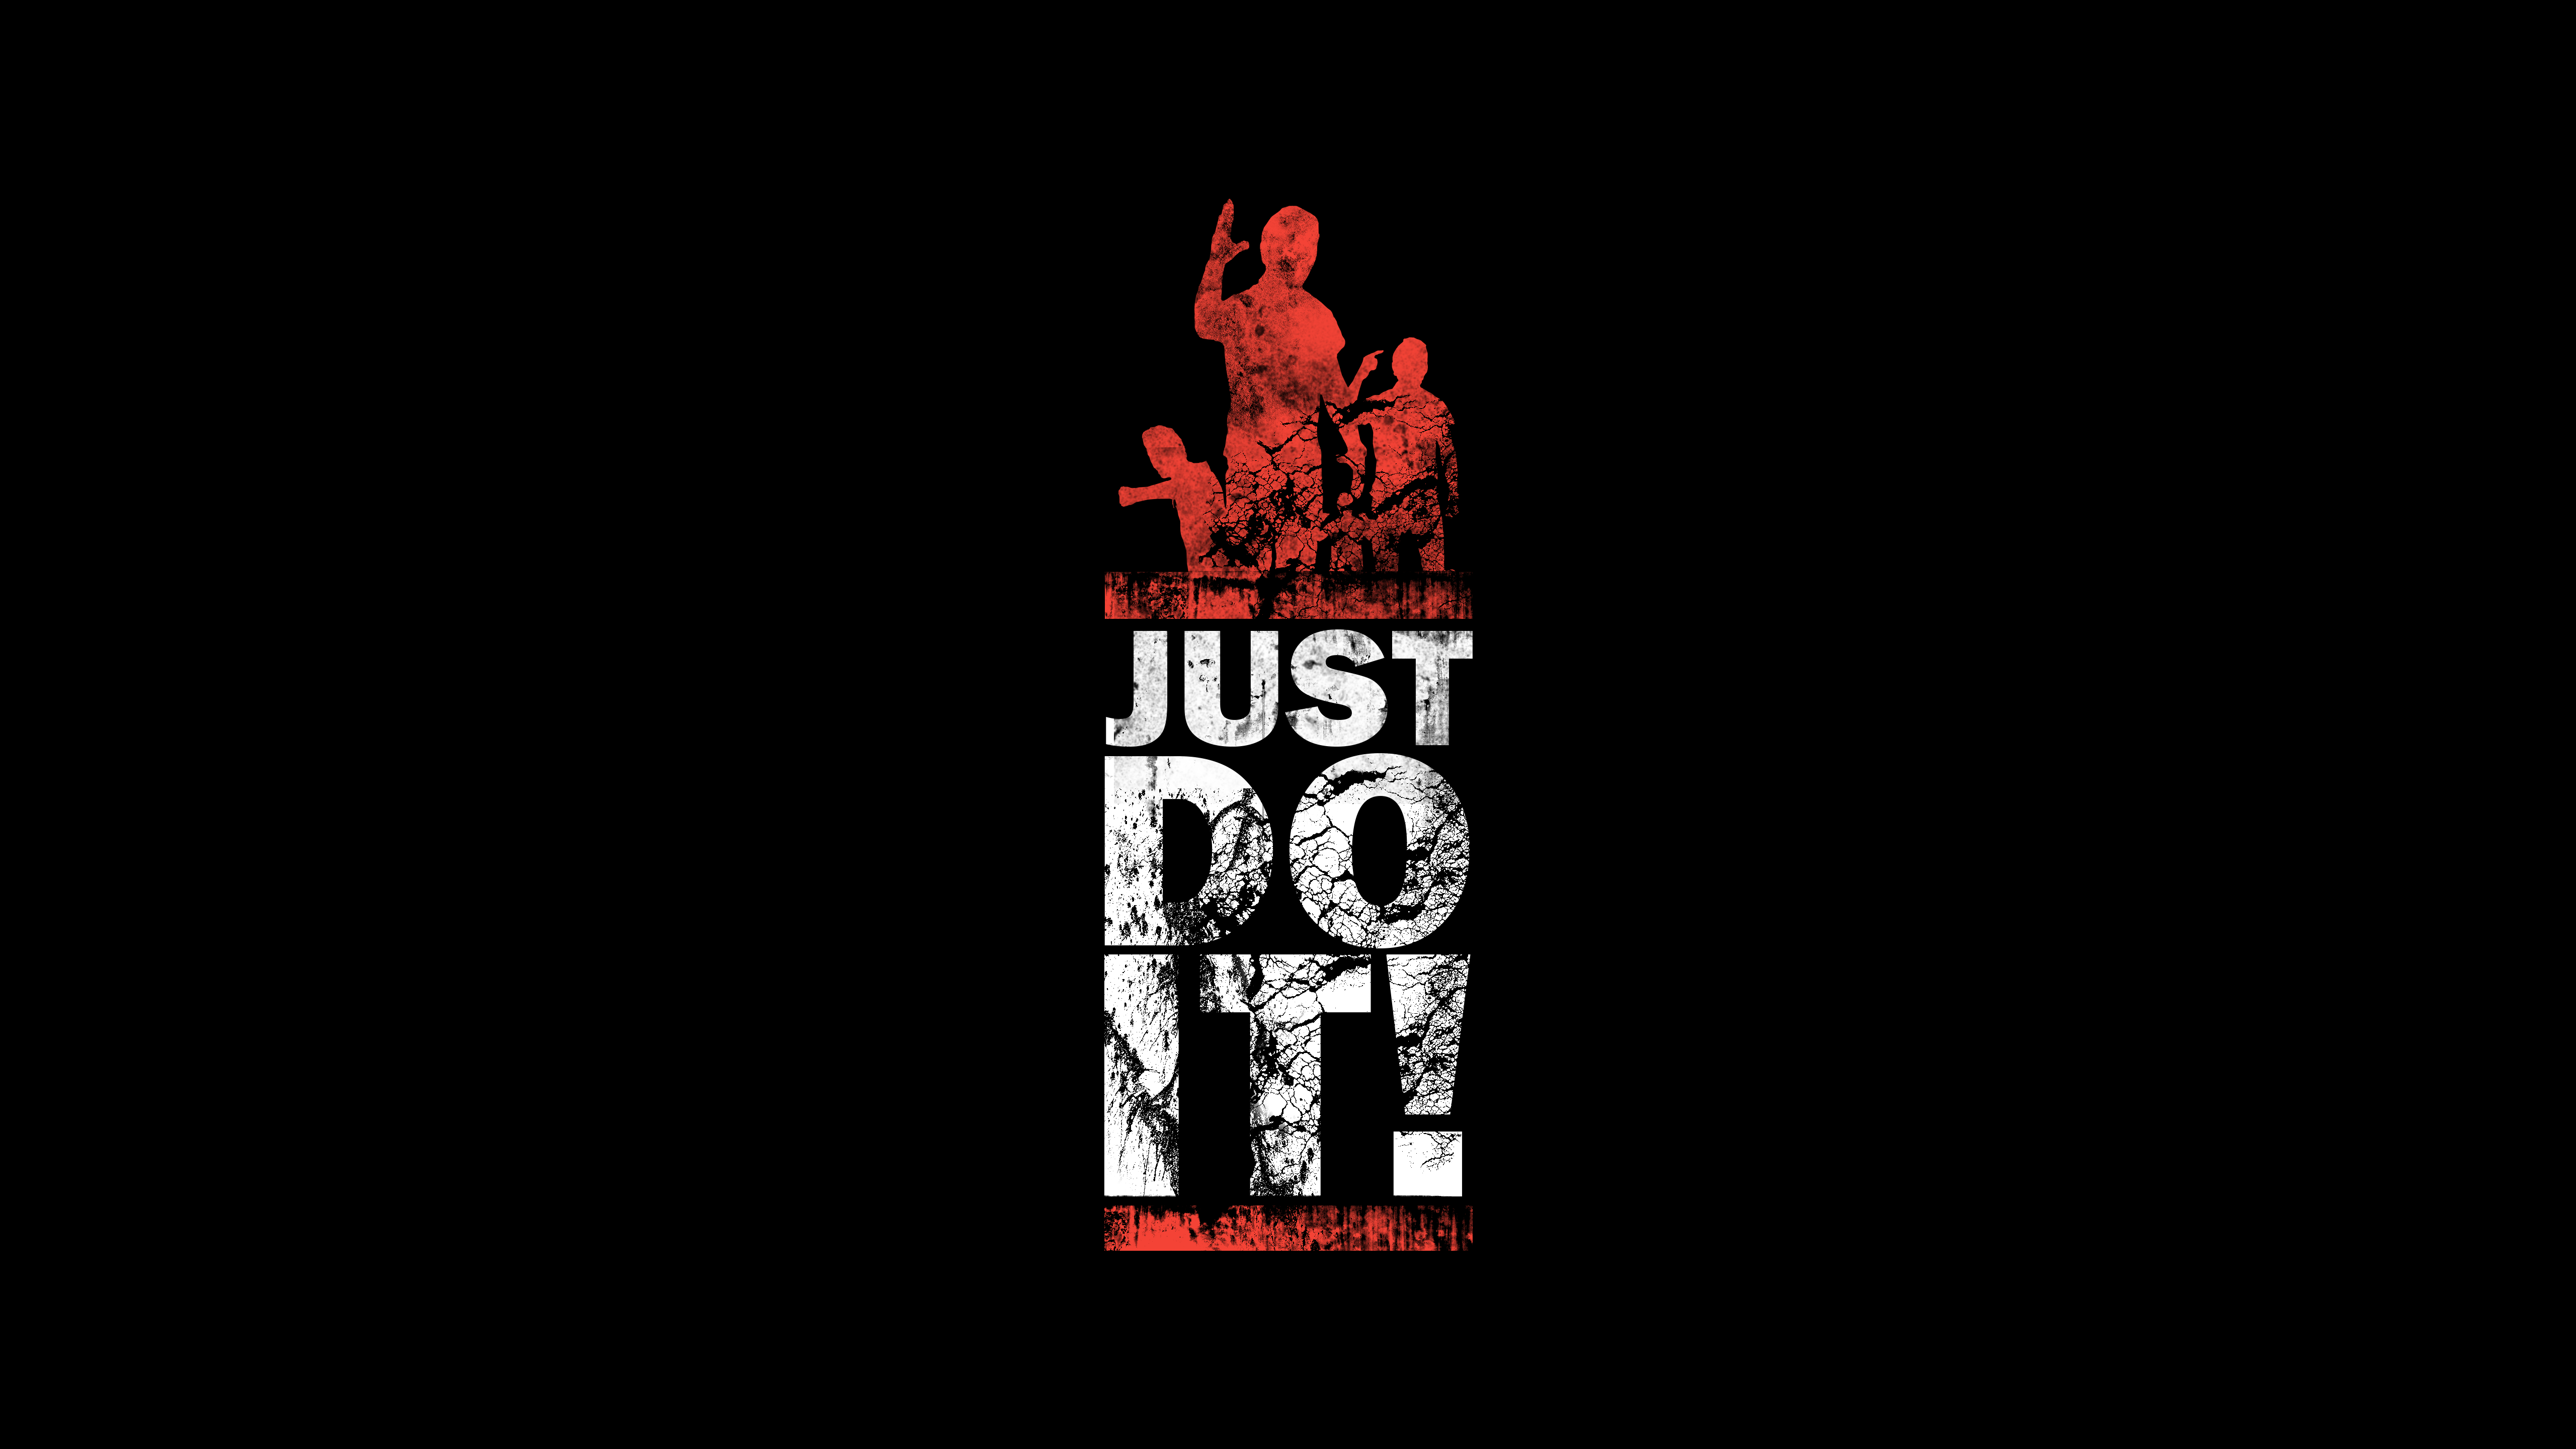 Just Do It Wallpapers 4k Hd Just Do It Backgrounds On Wallpaperbat